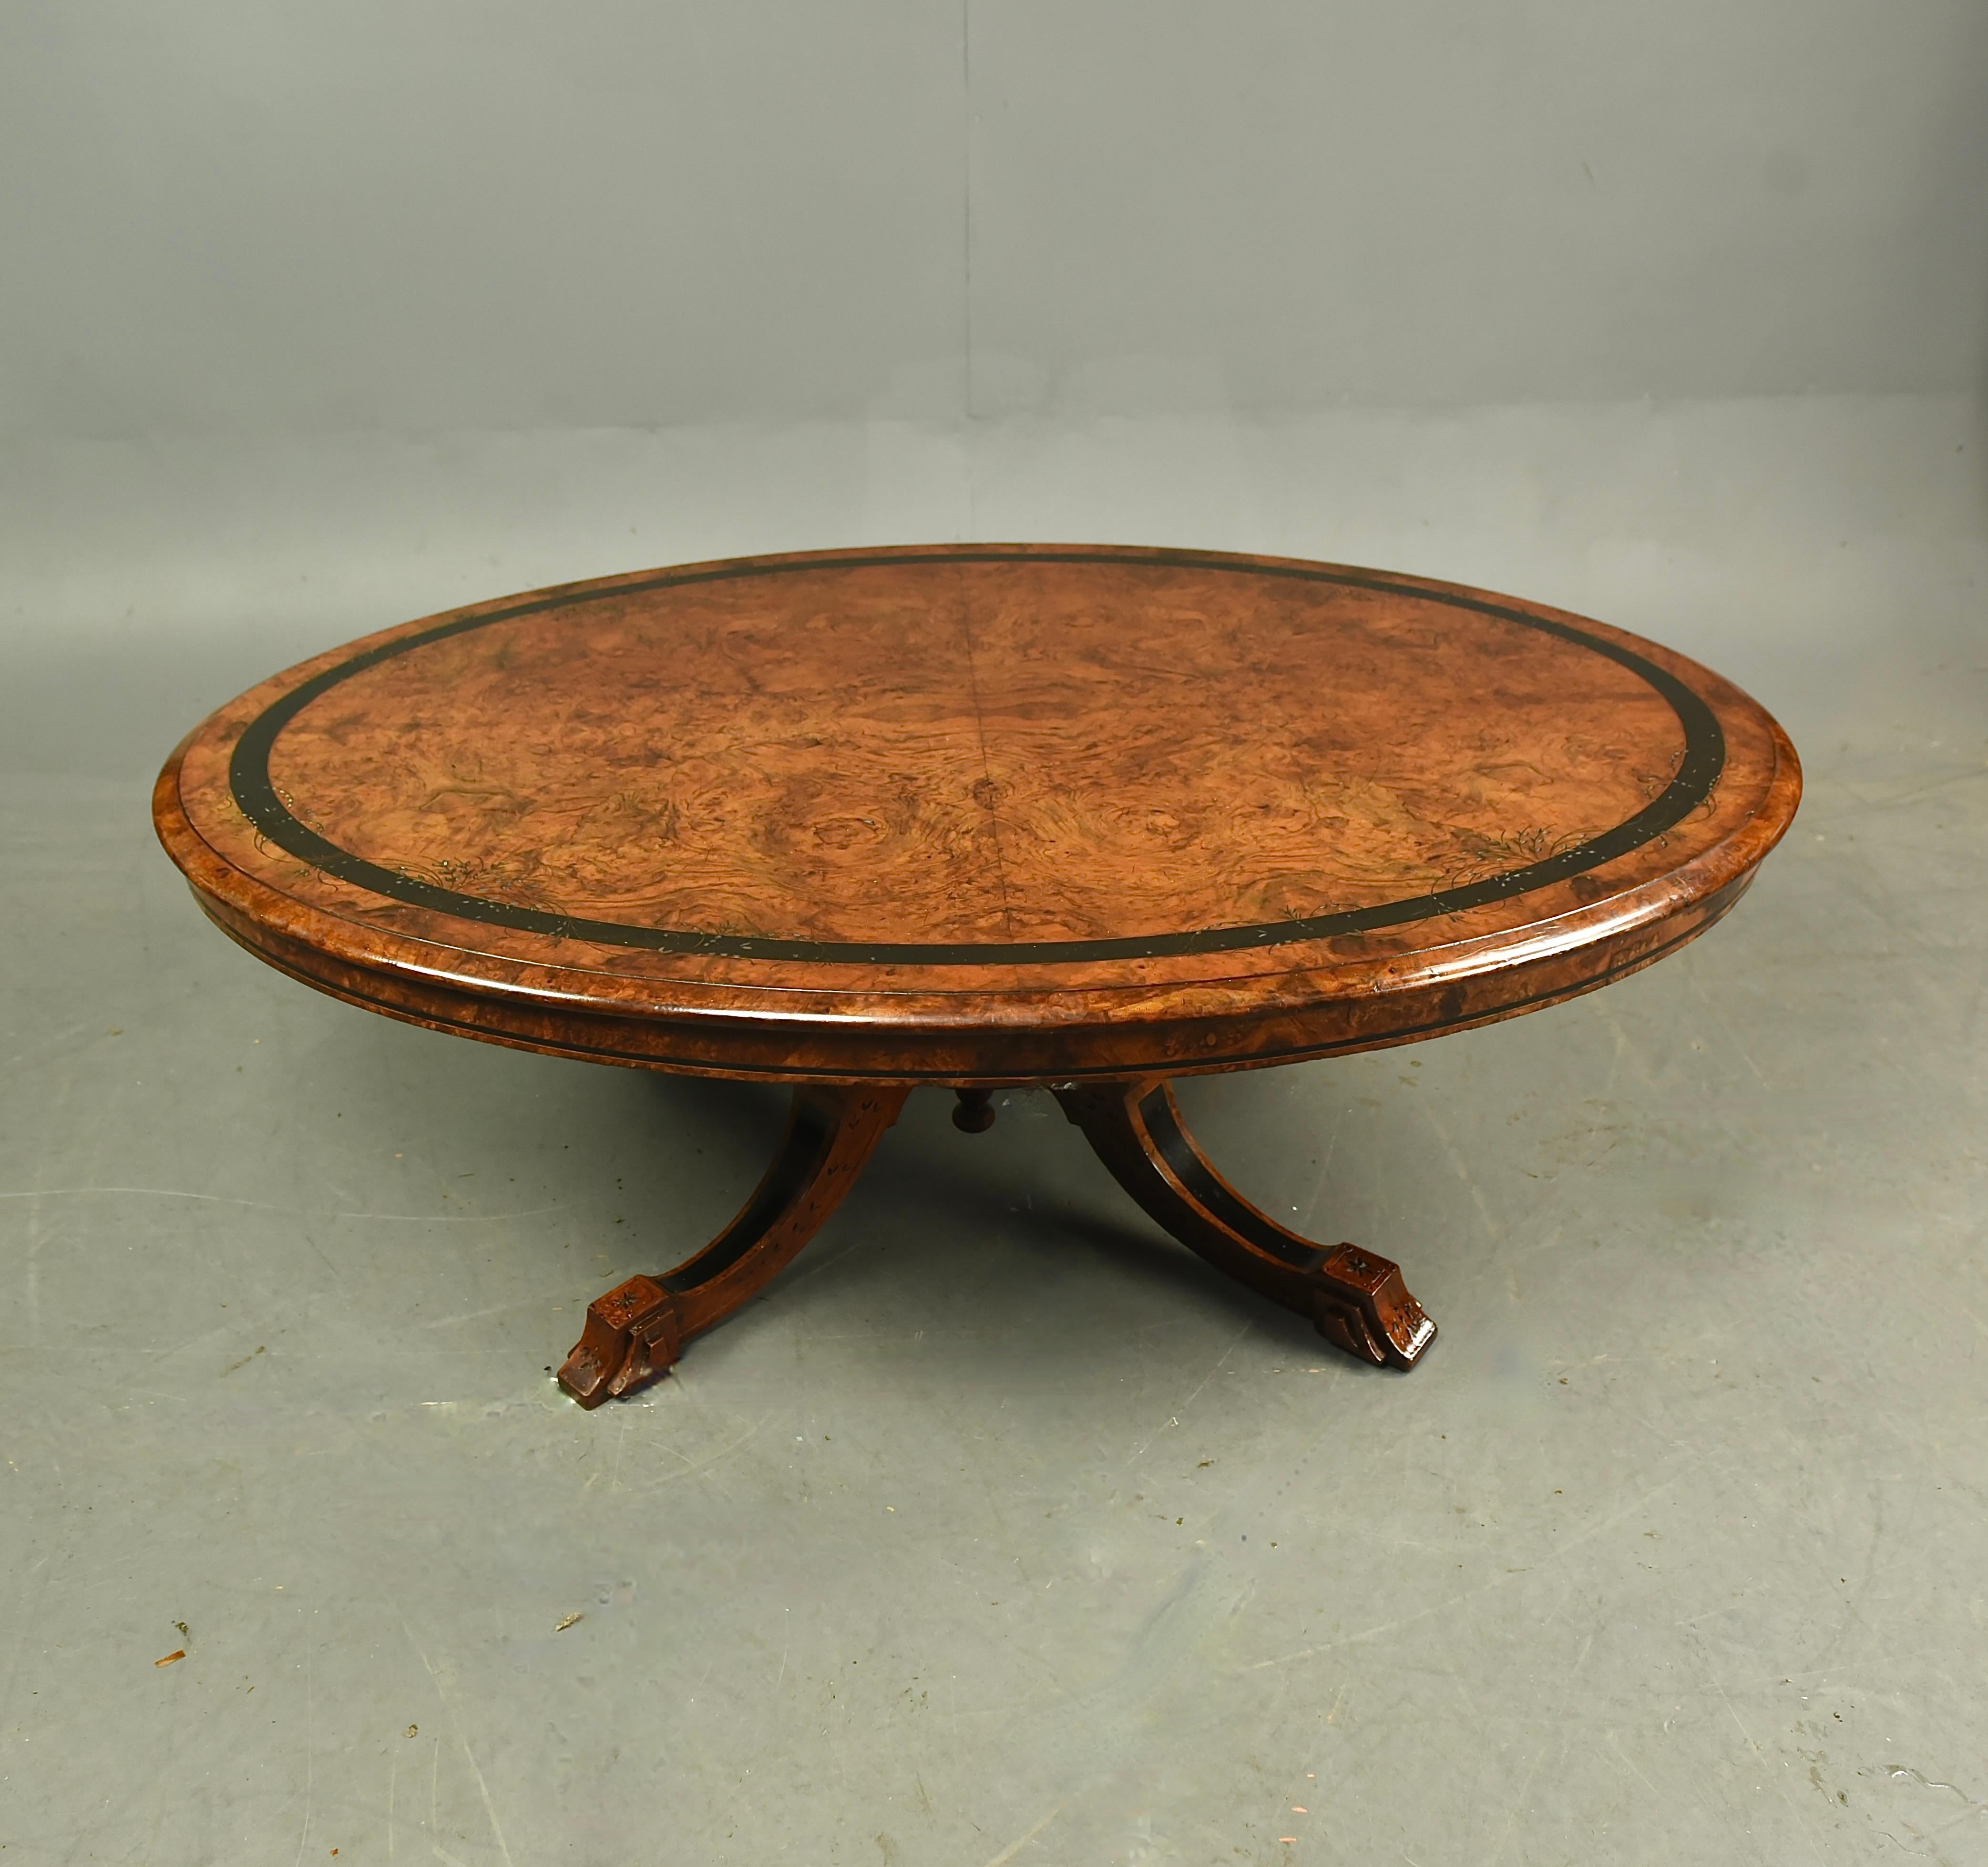 Fine 19th Century Victorian antique oval burr walnut coffee table that is a great colour with good figuring and ebony banding with fine floral carved details. The base has four out swept legs with four fluted column supports.